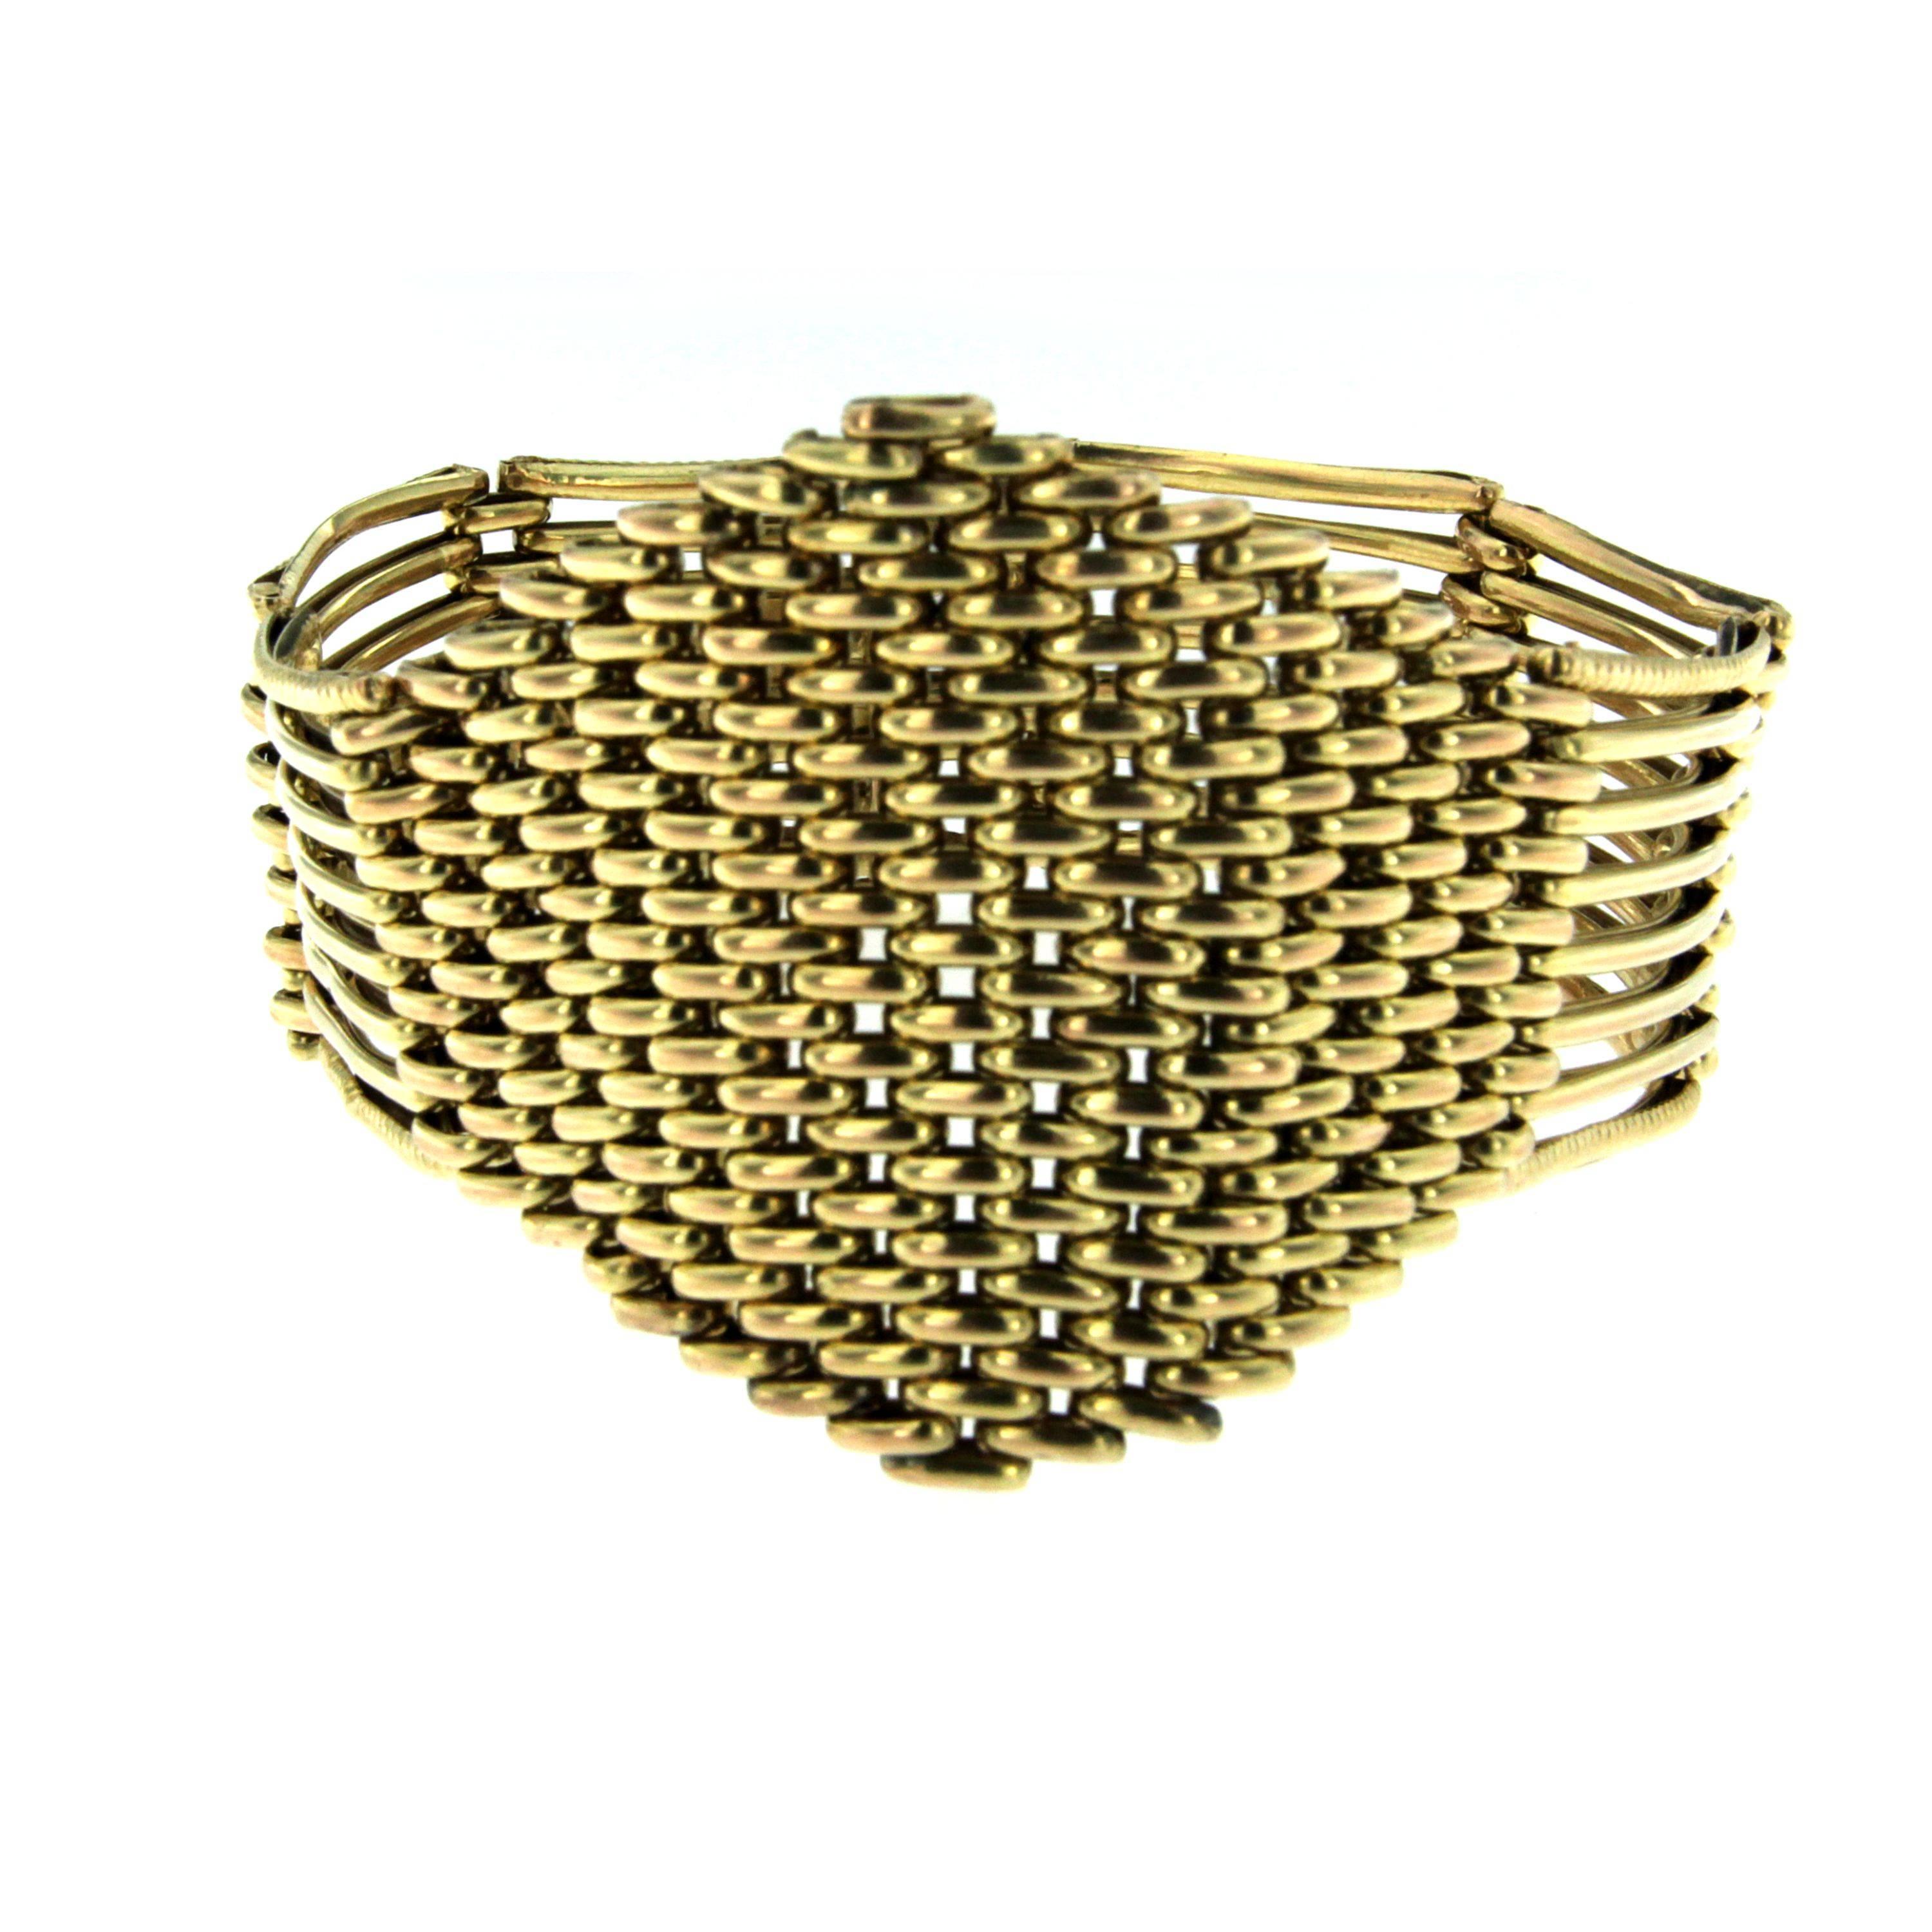 A stunning and rare Victorian Mesh Bracelet, circa 1890', in excellent condition.
Artfully handcrafted in solid 12k yellow gold (stamped) featuring in the middle an hexagonal geometrical figure with a mesh motif, it has a safety lock on the clasp.